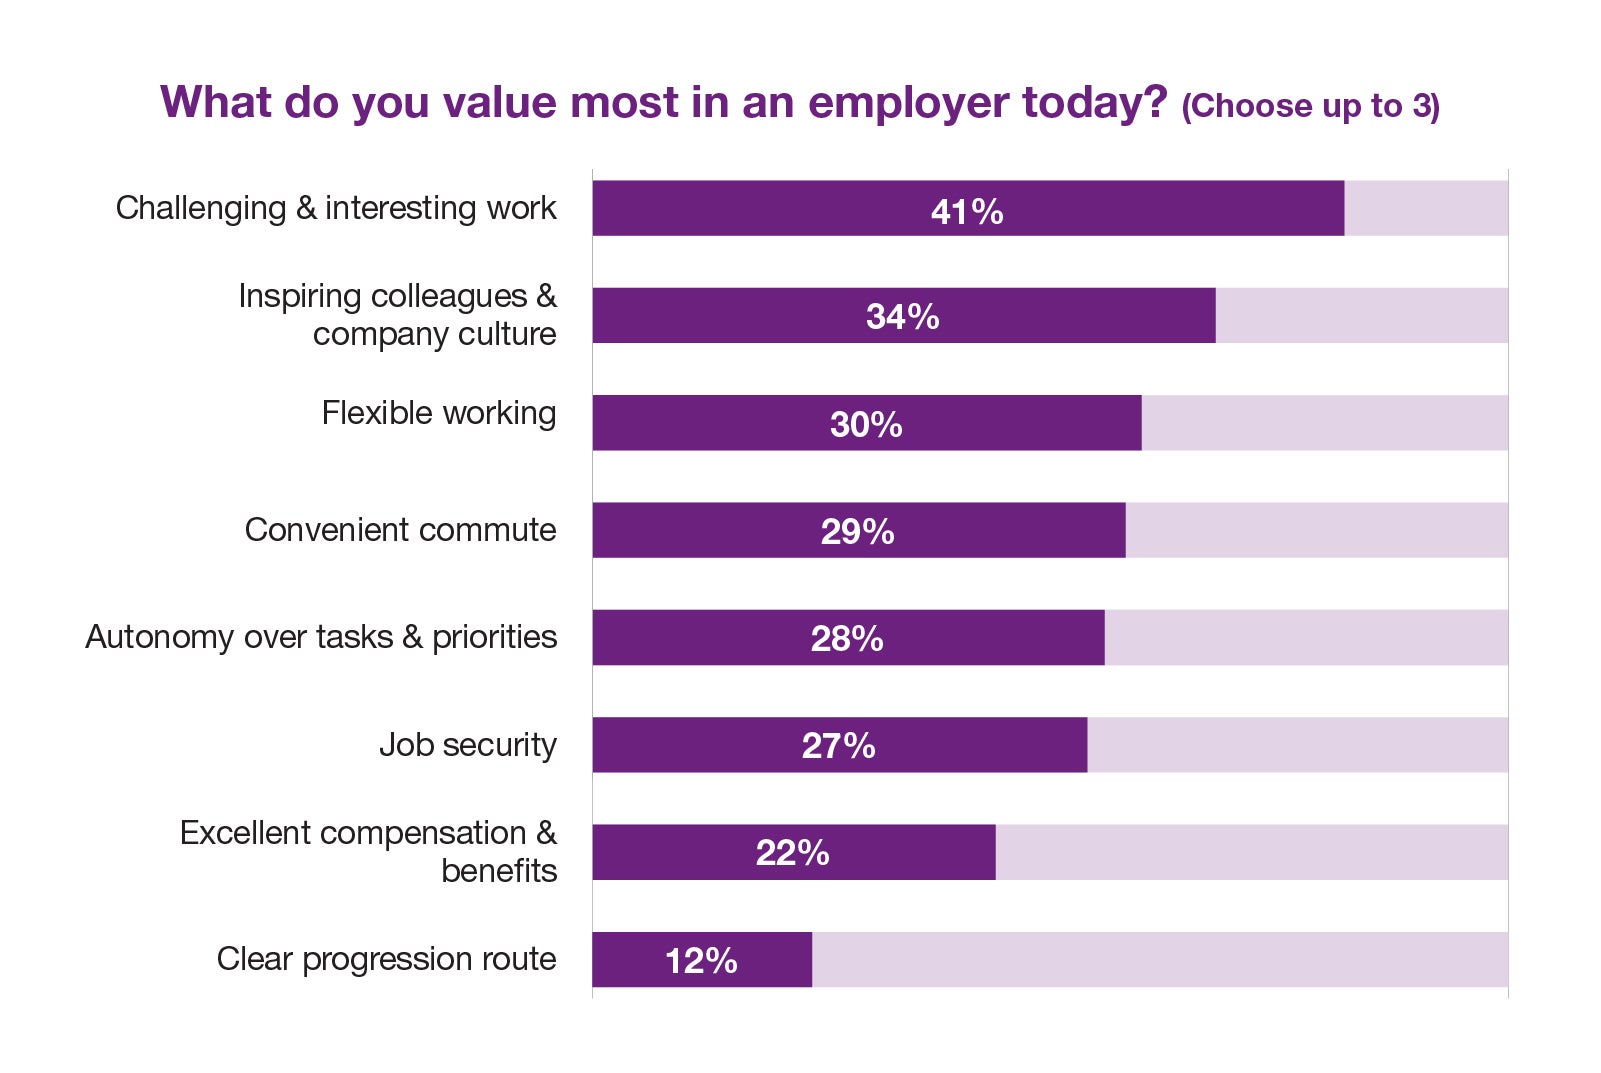 What do you value most in an employer today?